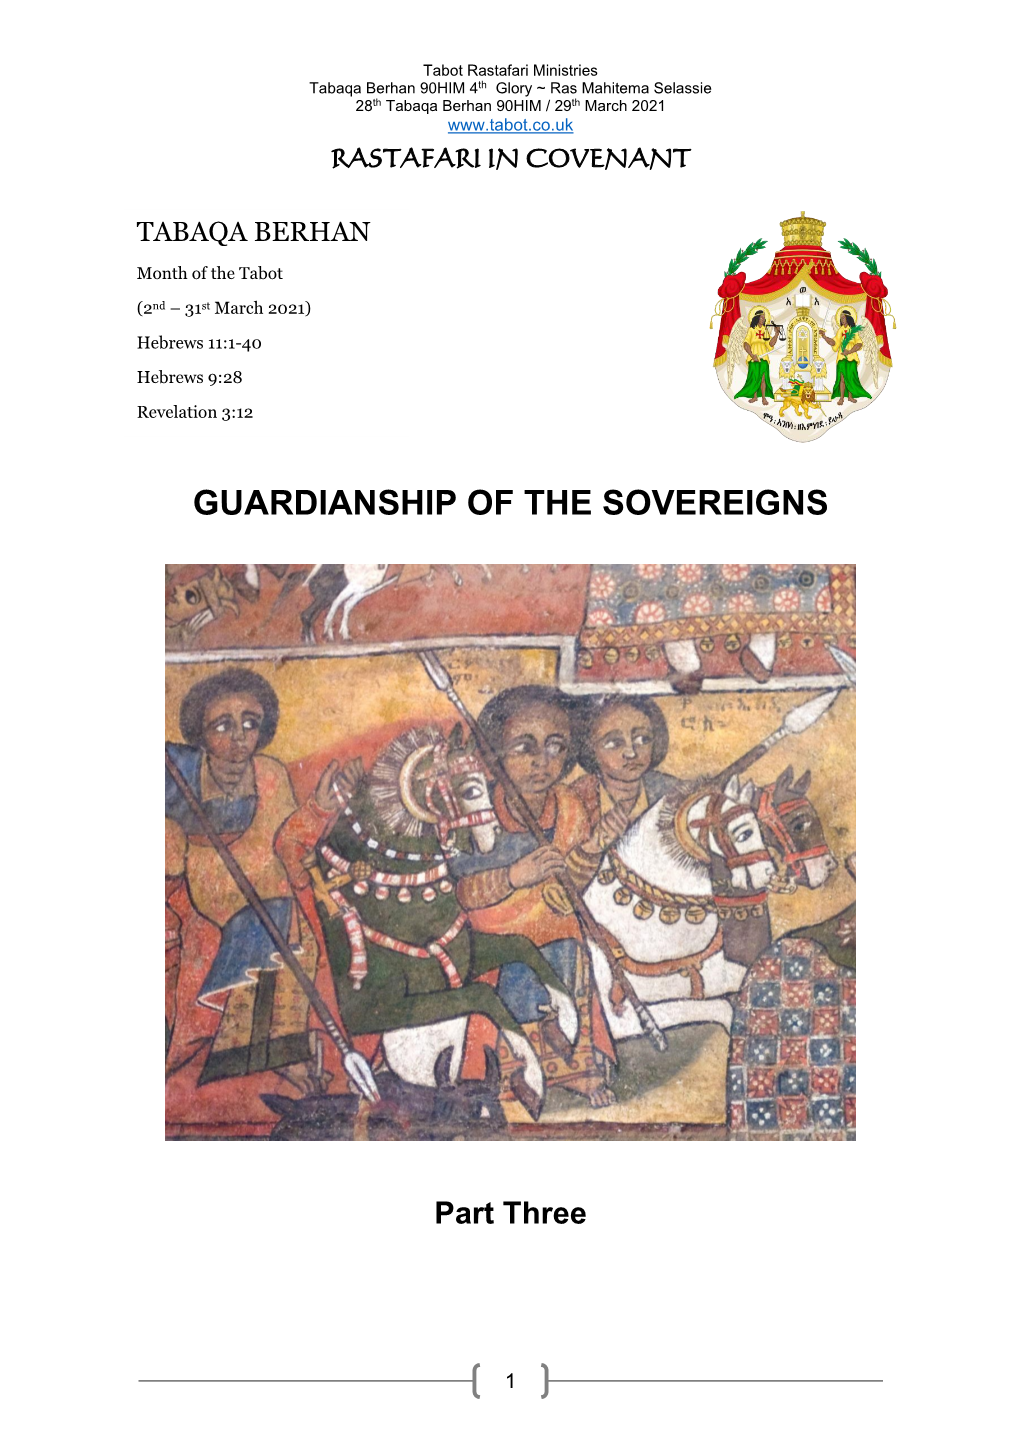 Guardianship of the Sovereigns